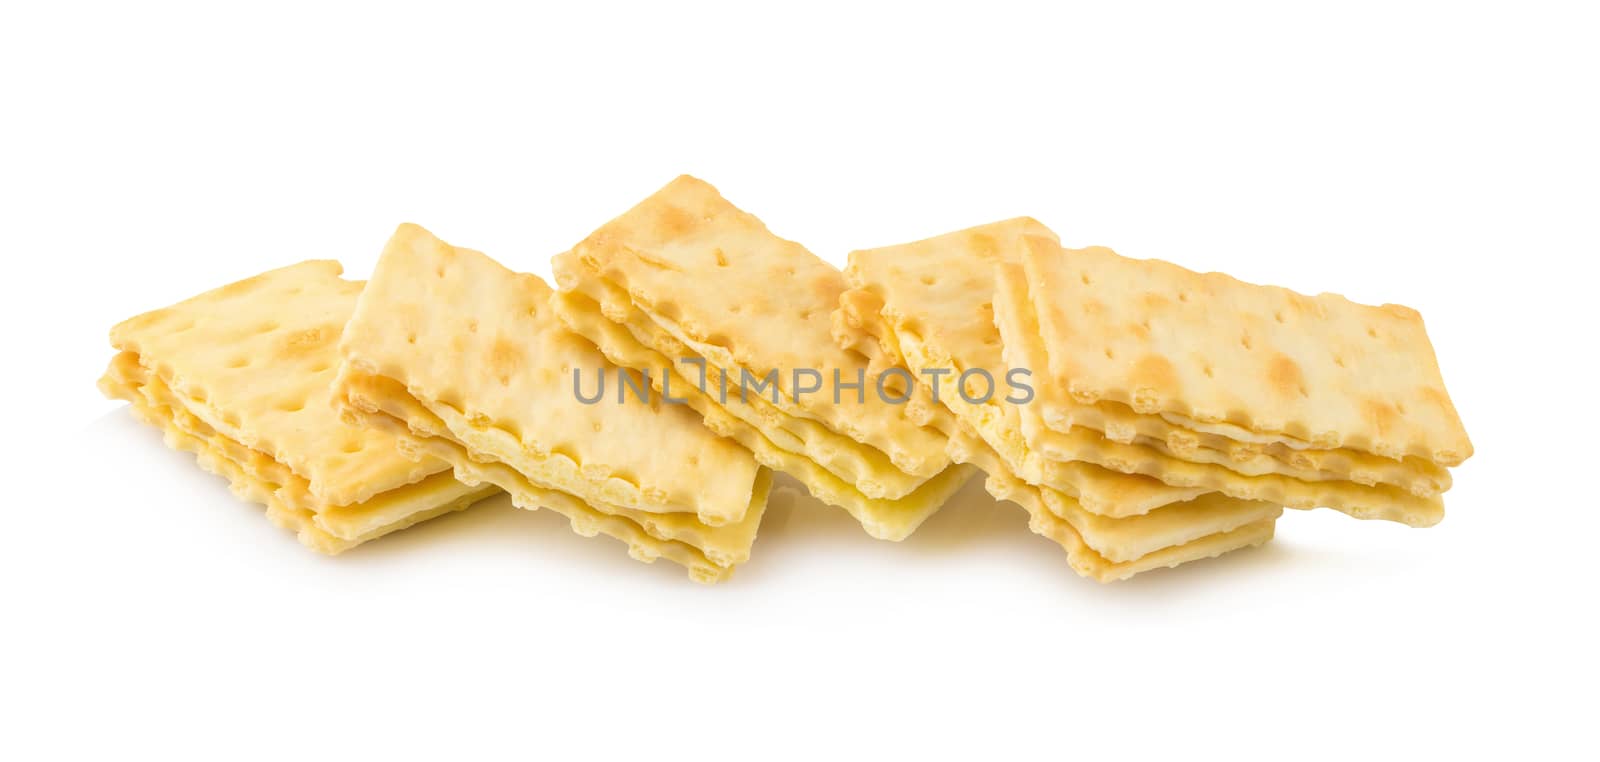 Cracker with creamy layer isolated on white background.